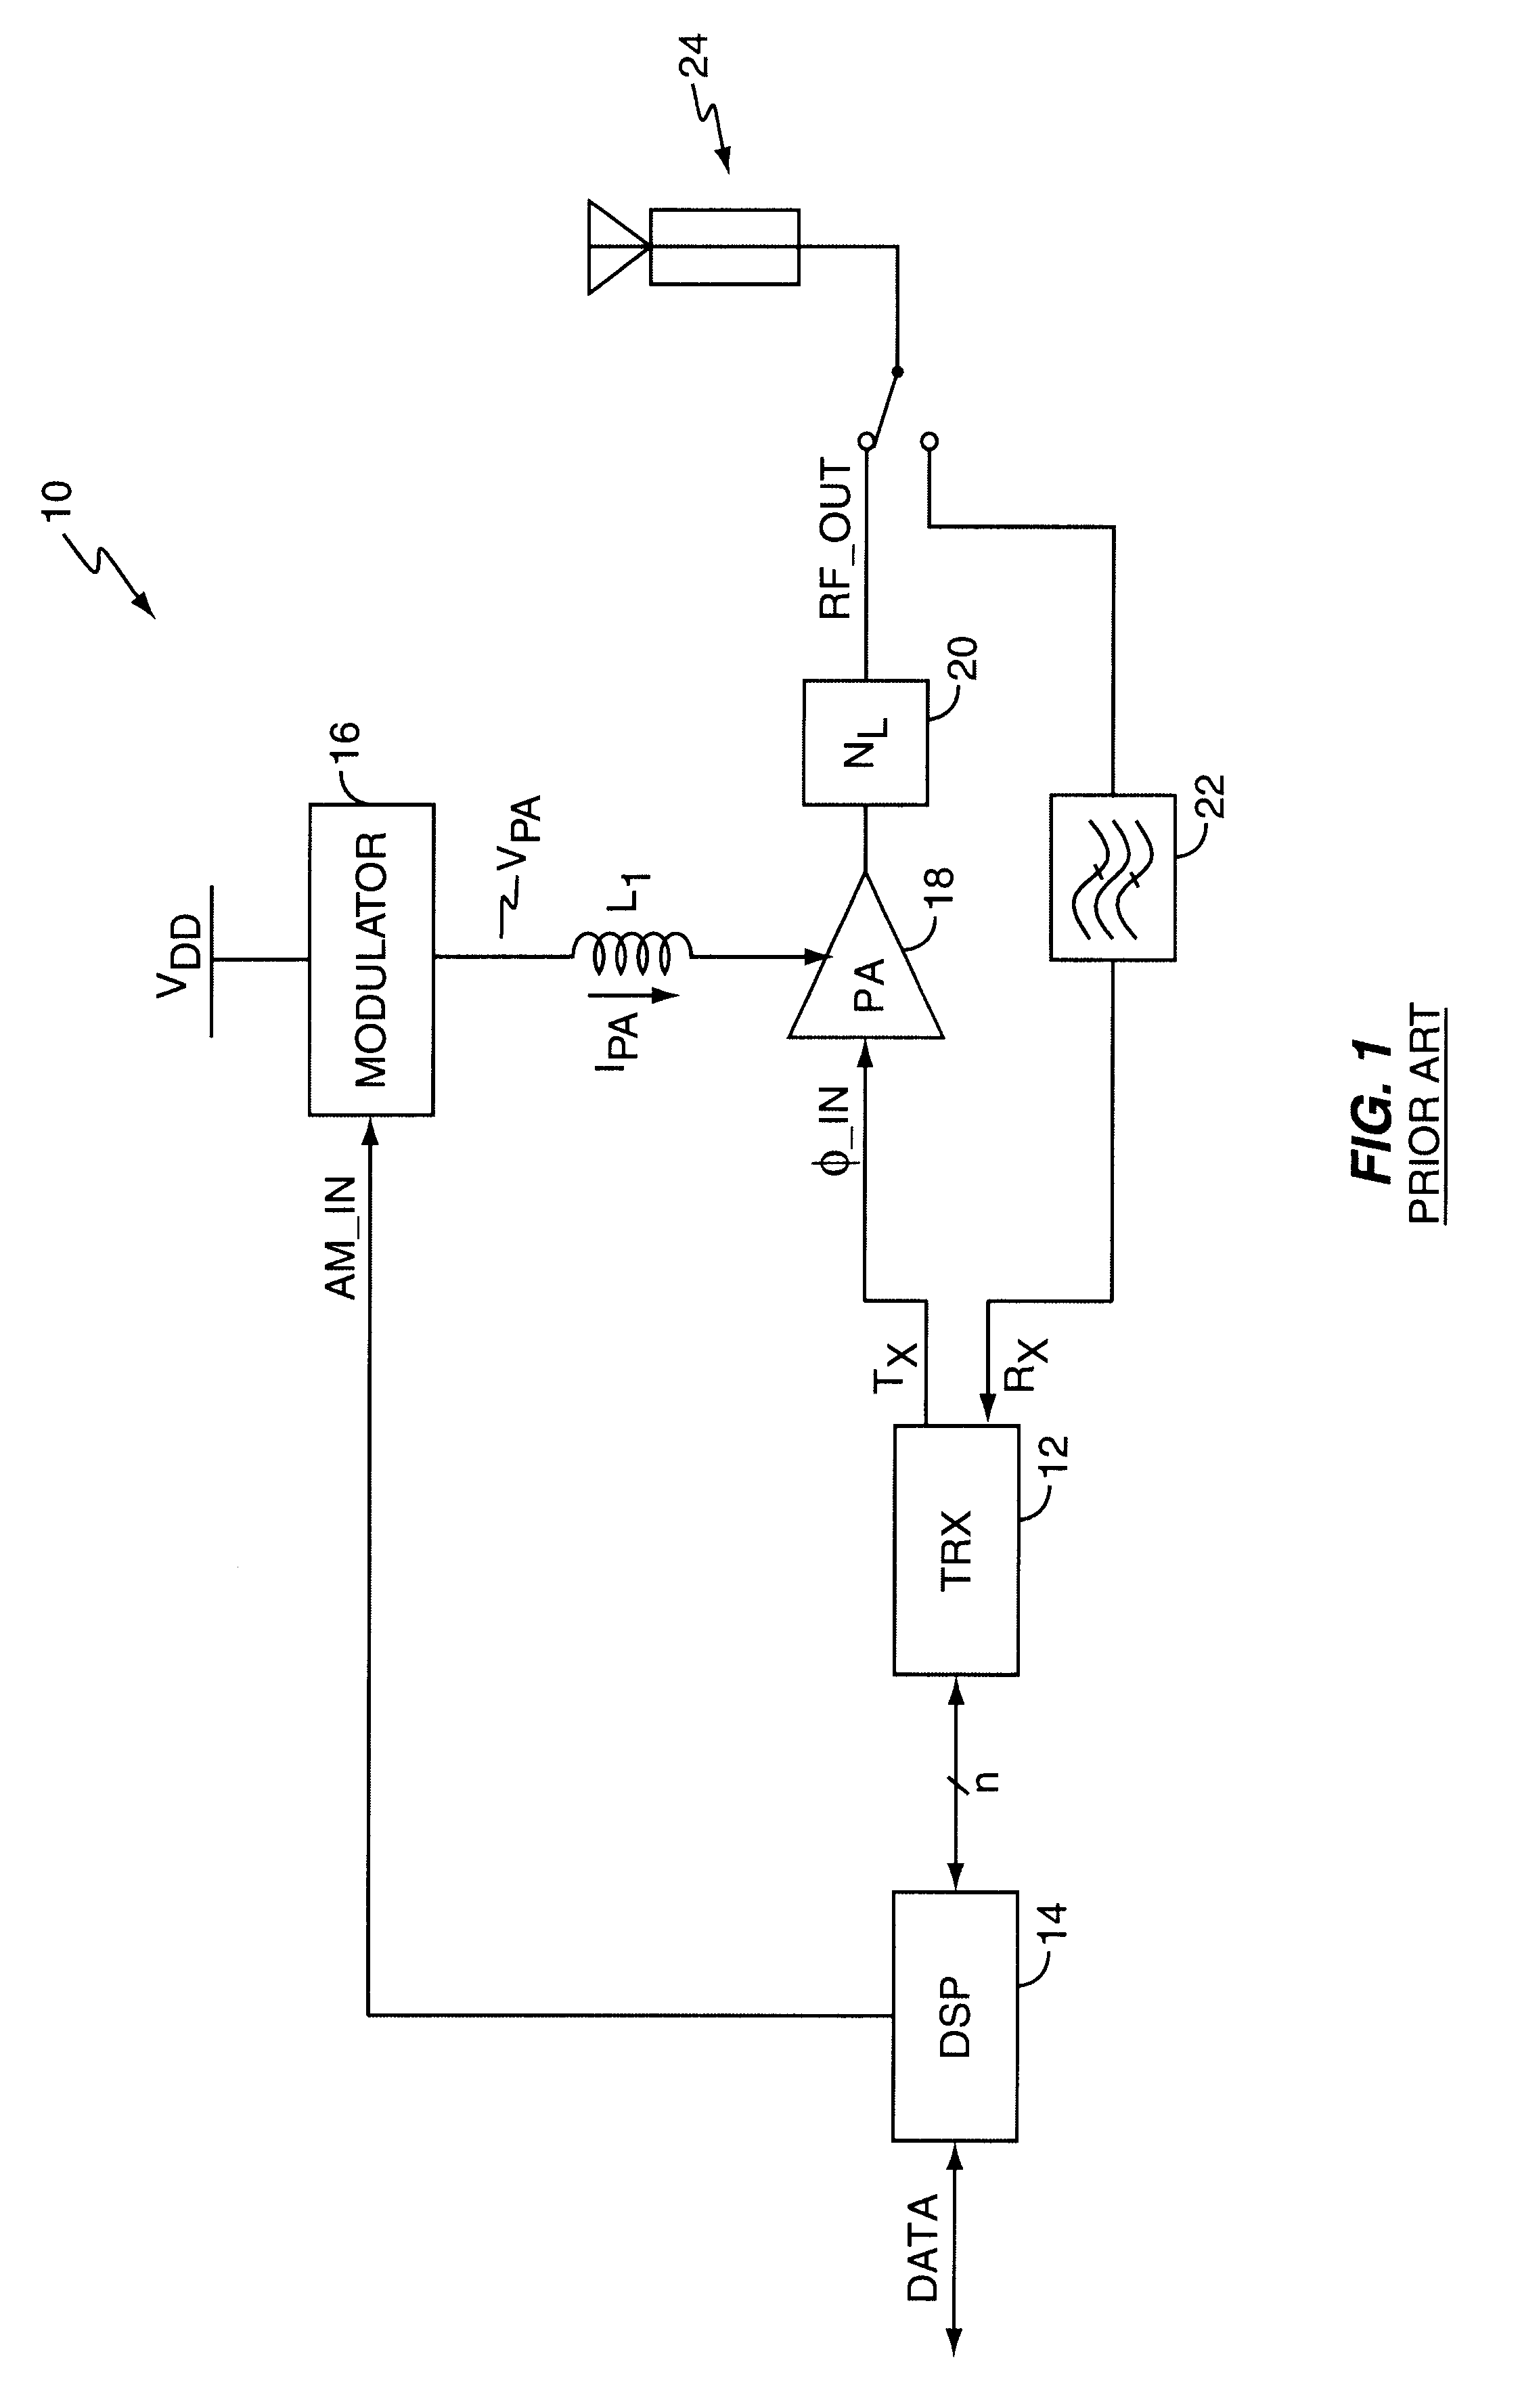 Current modulator with dynamic amplifier impedance compensation